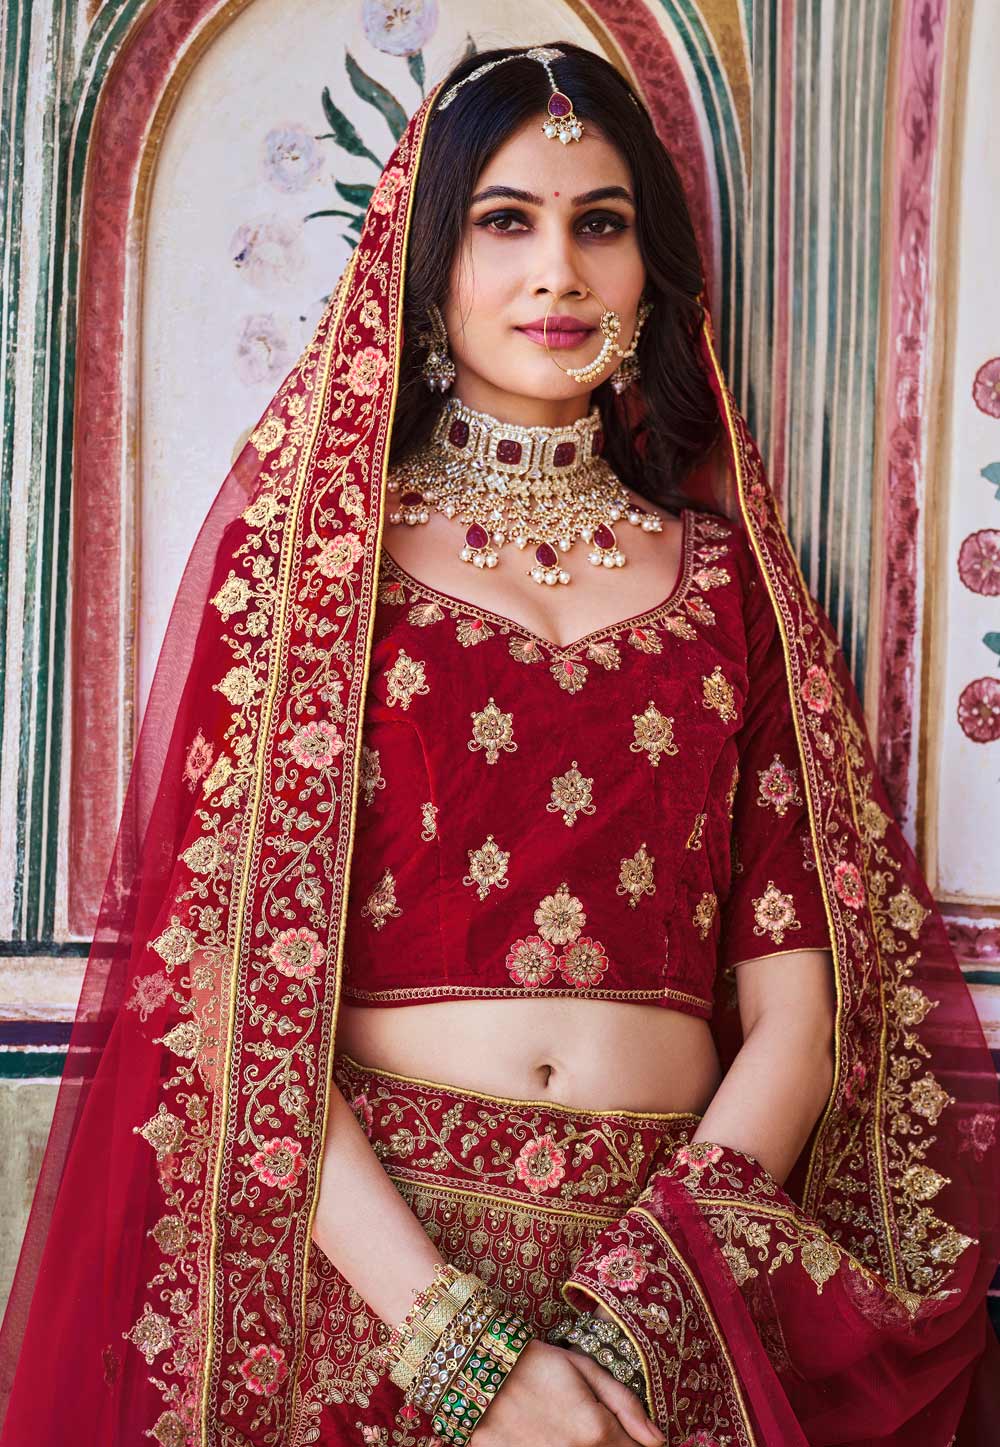 All Essentials You Need To Know About in Bridal Jewellery